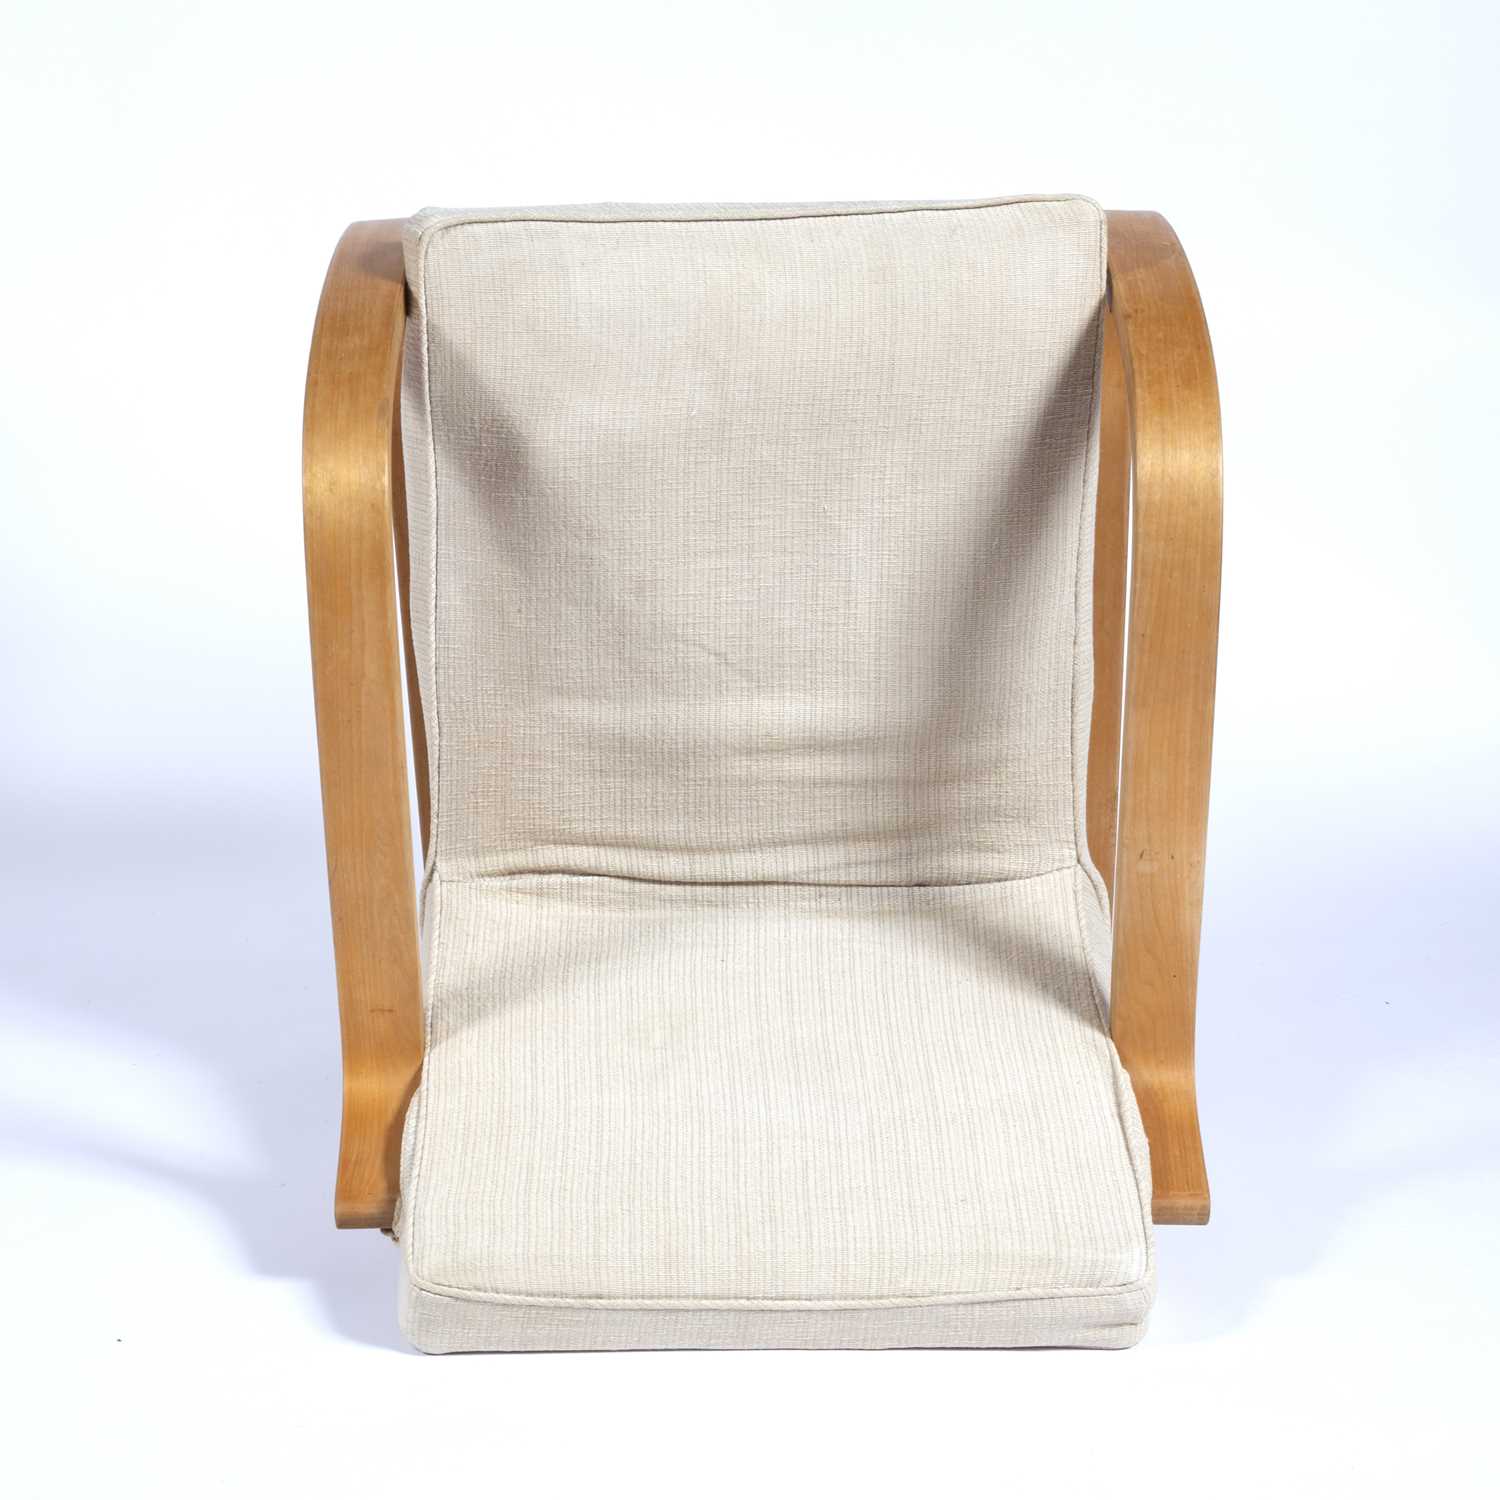 Alvar Aalto (1898-1976) for Finmar Ltd 'Model 402' bentwood birch chair, with the original label - Image 7 of 8